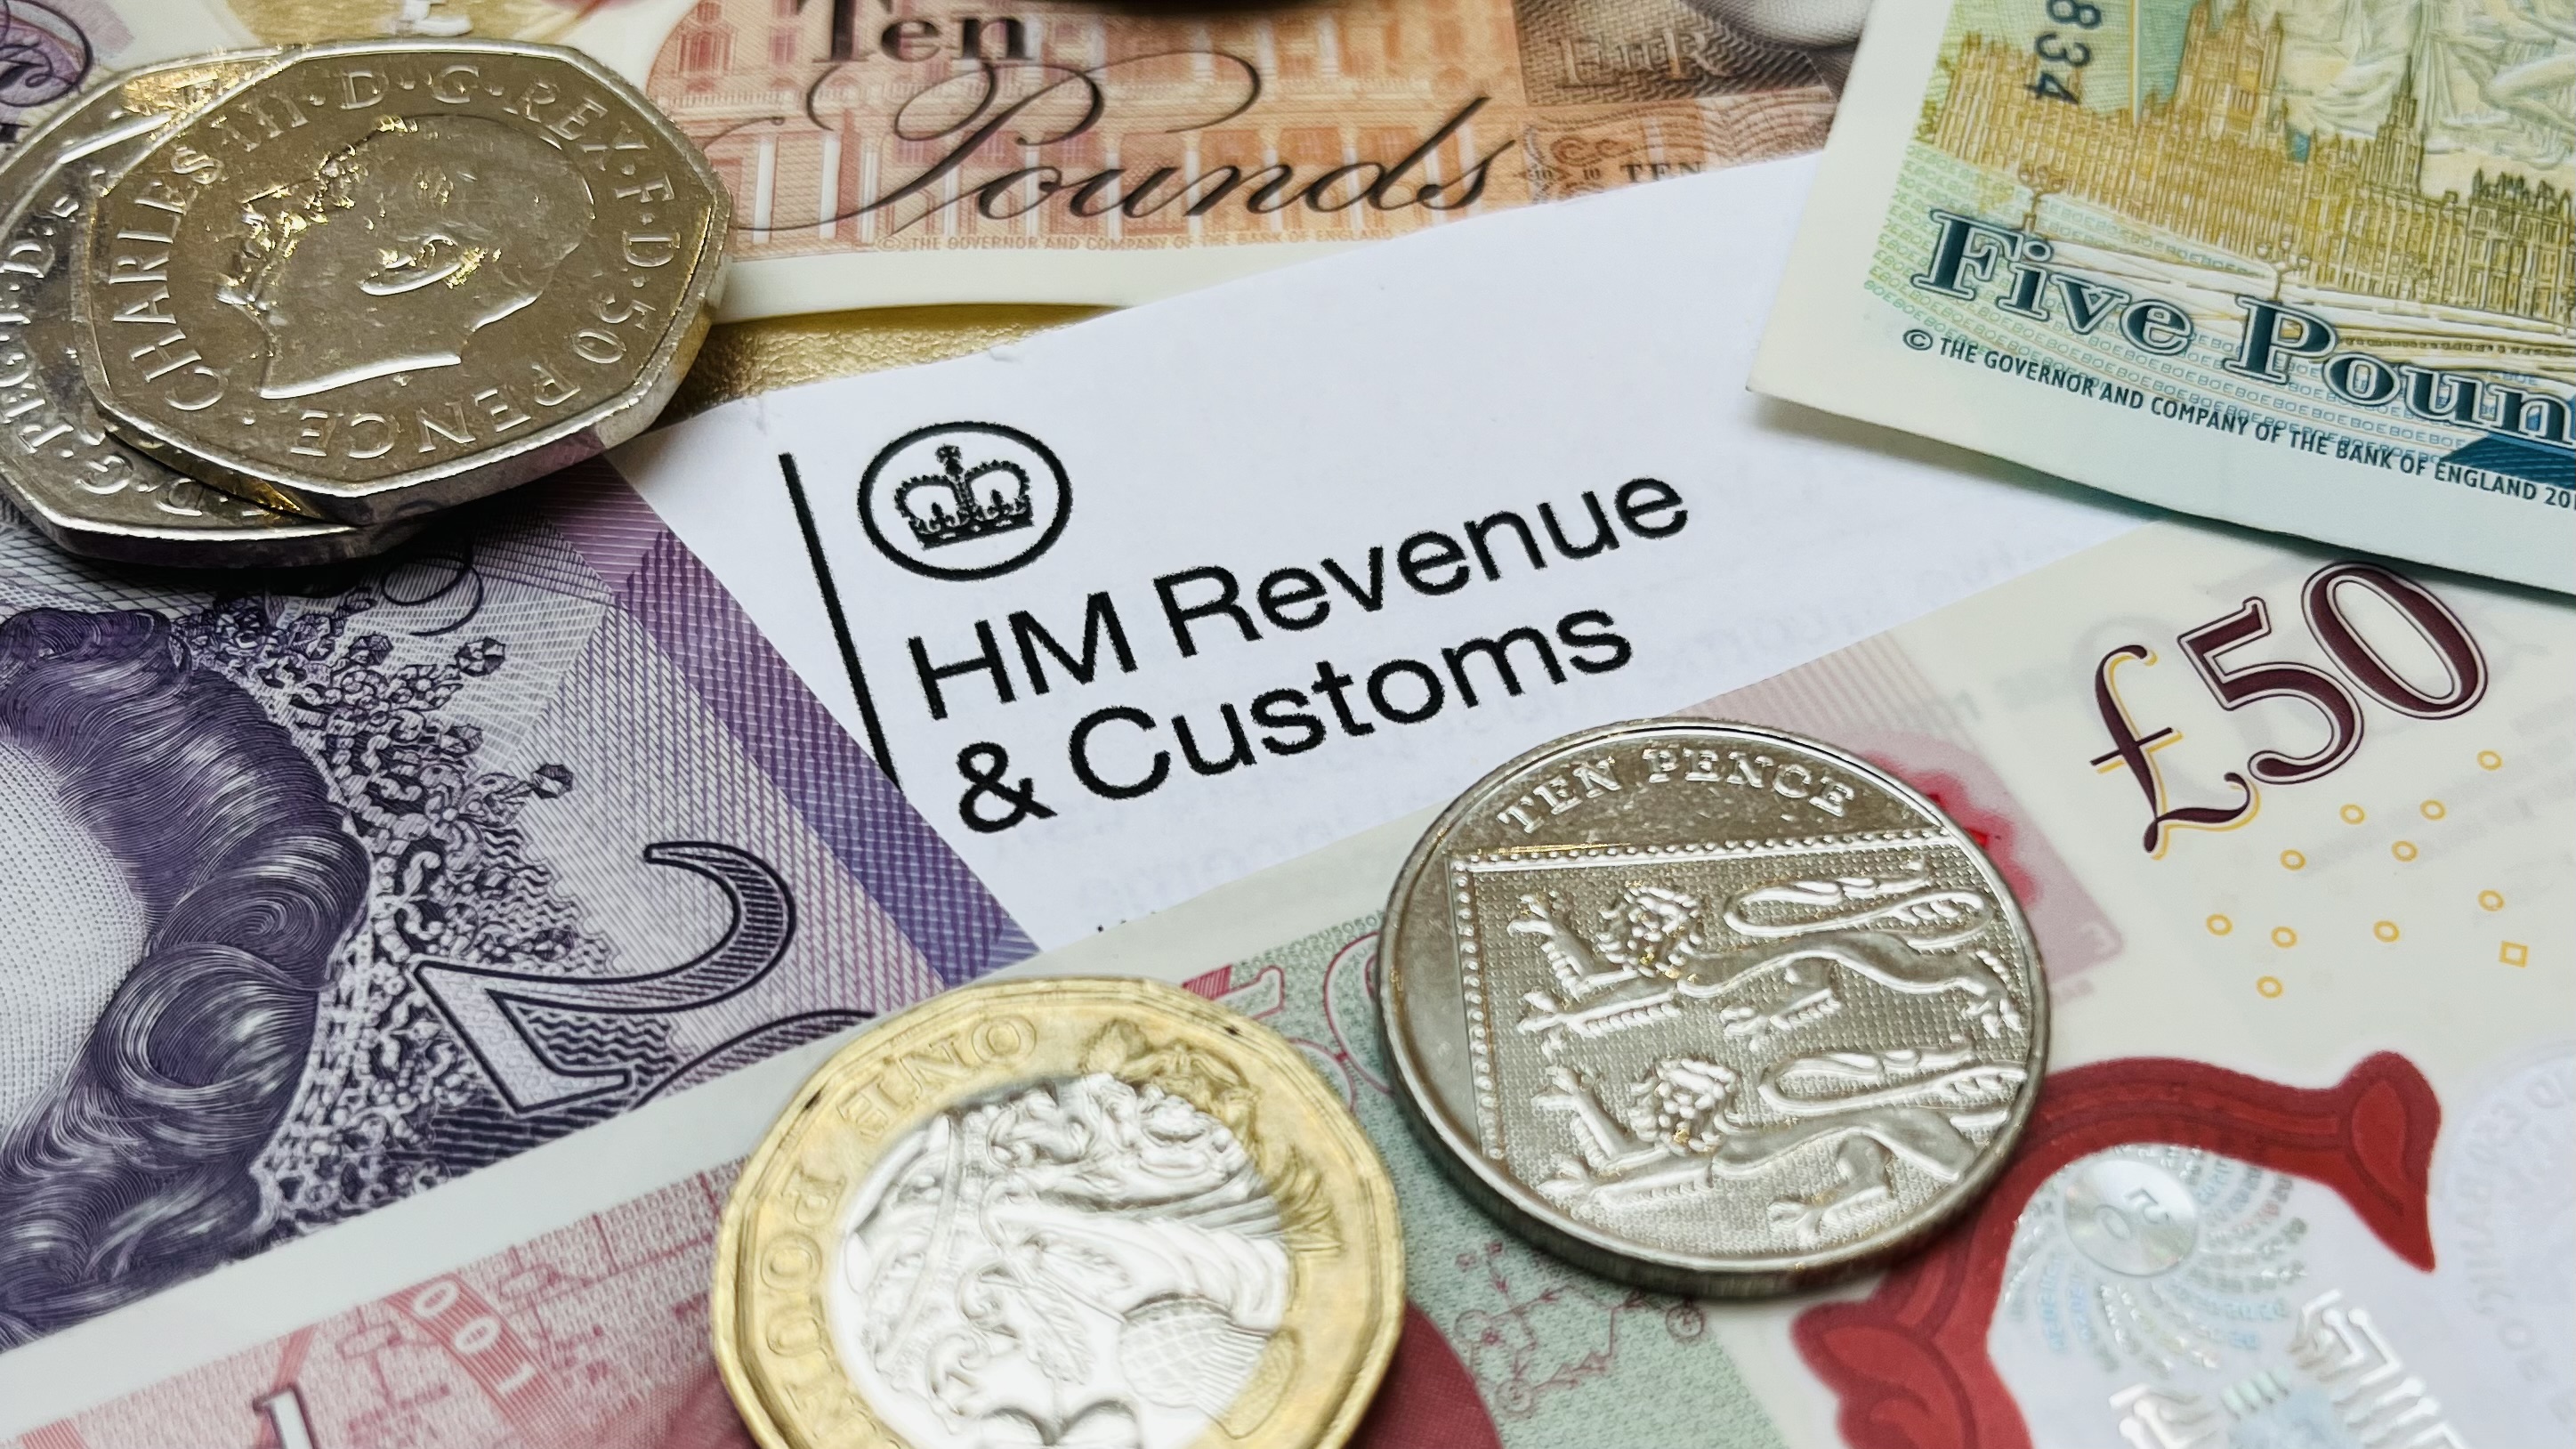 HMRC Document with British Currency